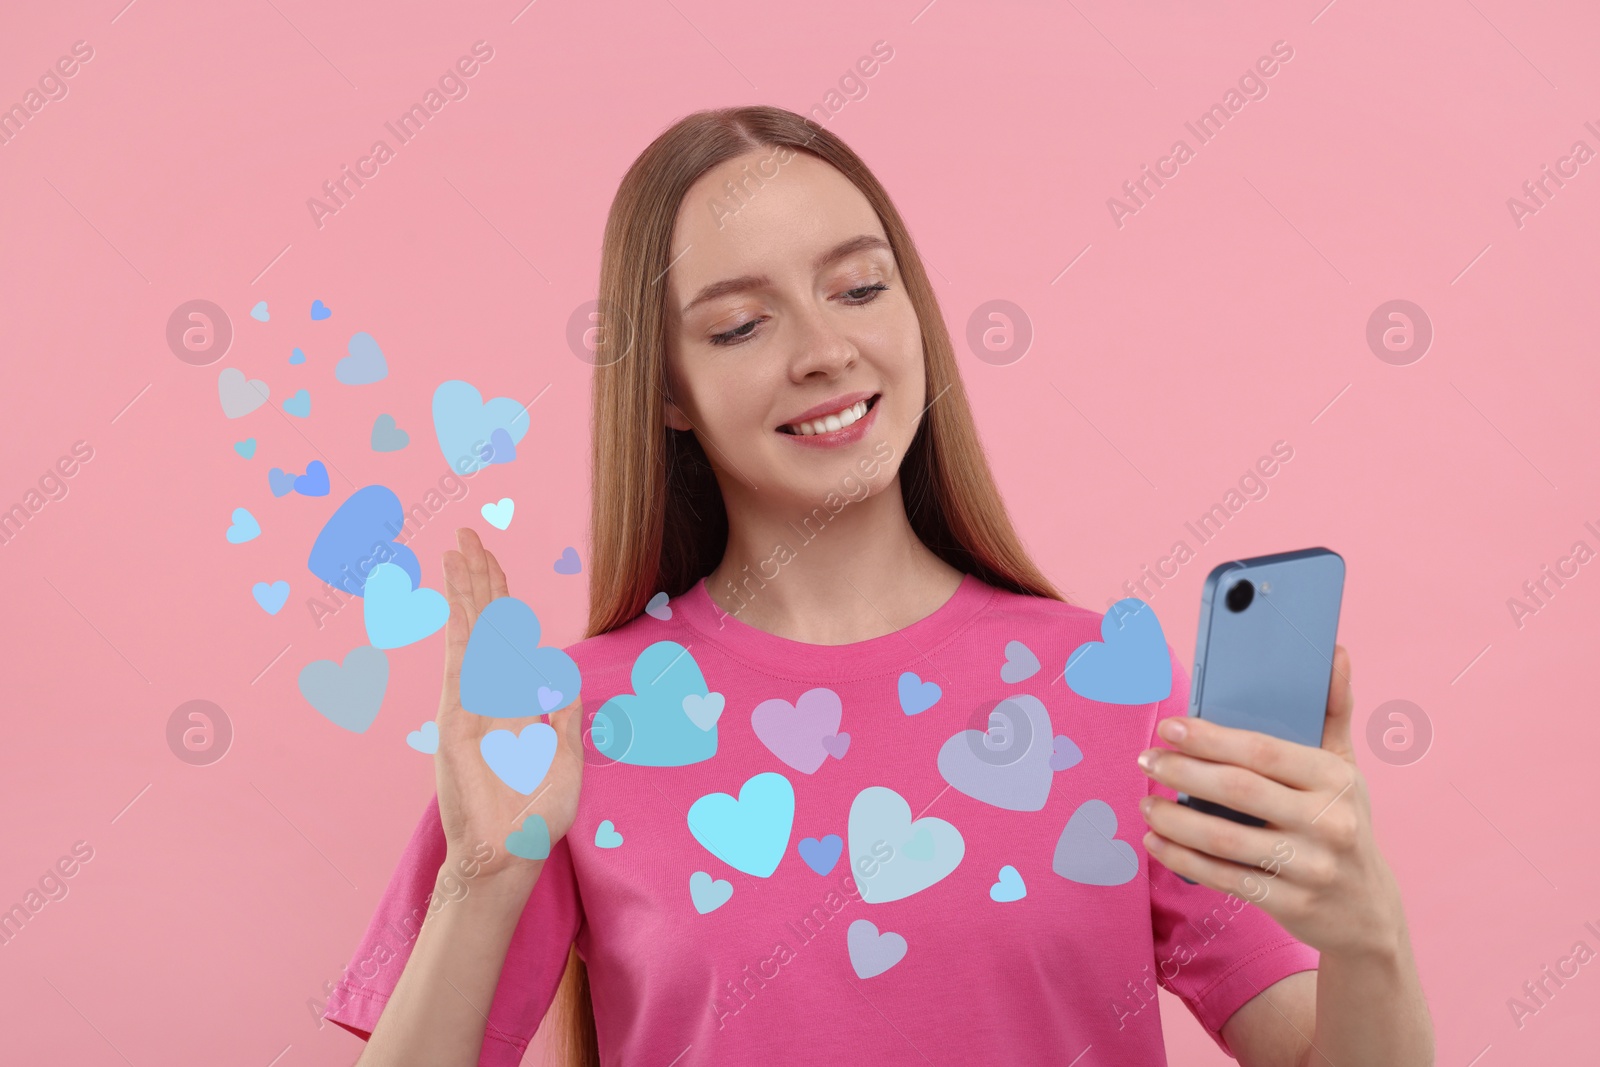 Image of Long distance love. Woman video chatting with sweetheart via smartphone on pink background. Hearts flying out of device